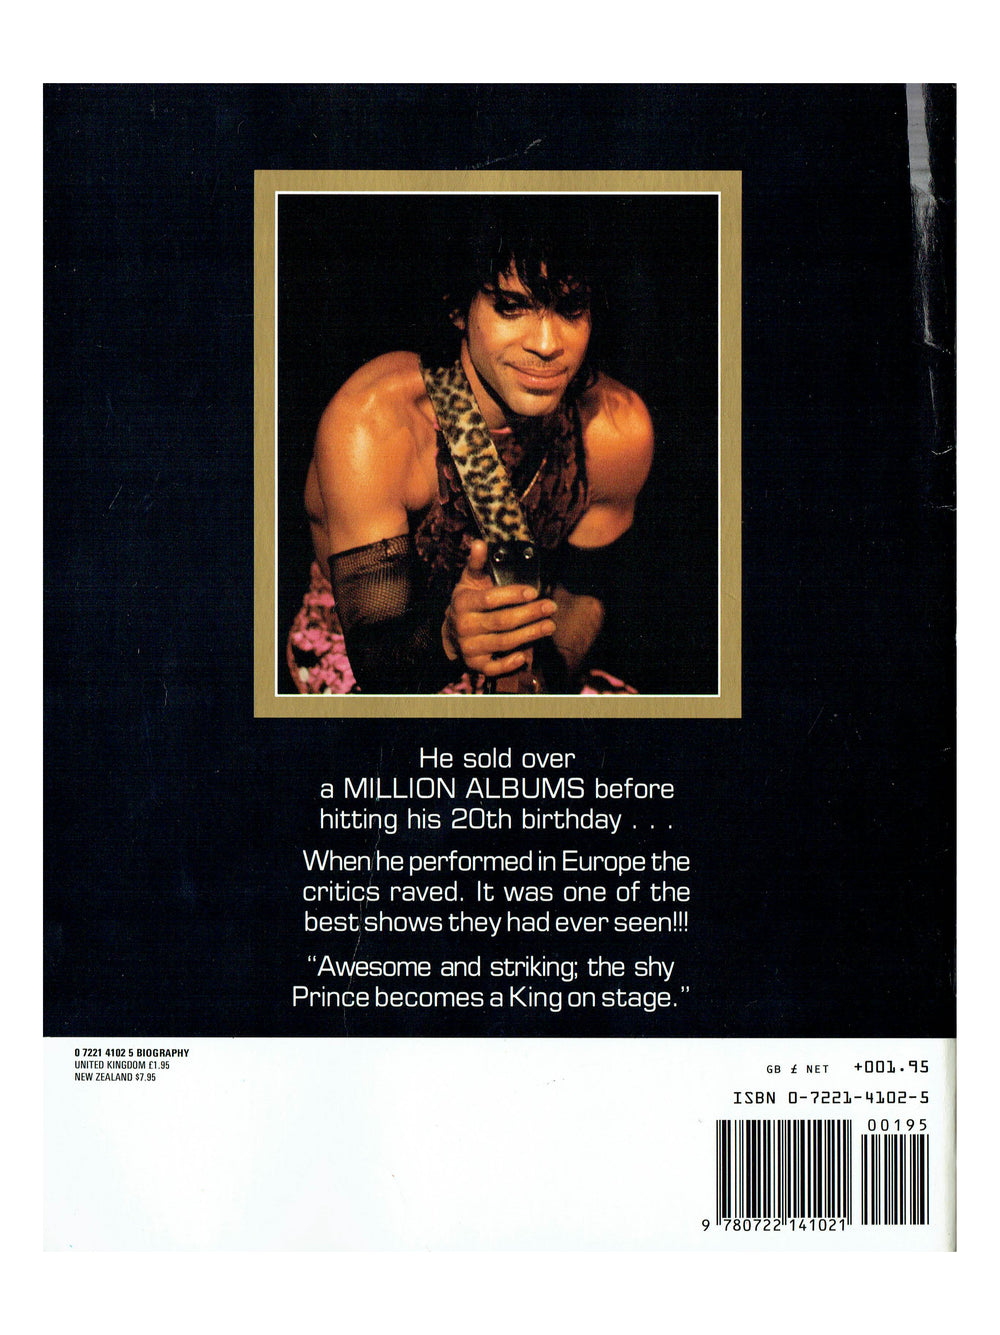 Prince –Softbacked The Year Of Paperback Book 64 Page UK Publication Preloved: 1984